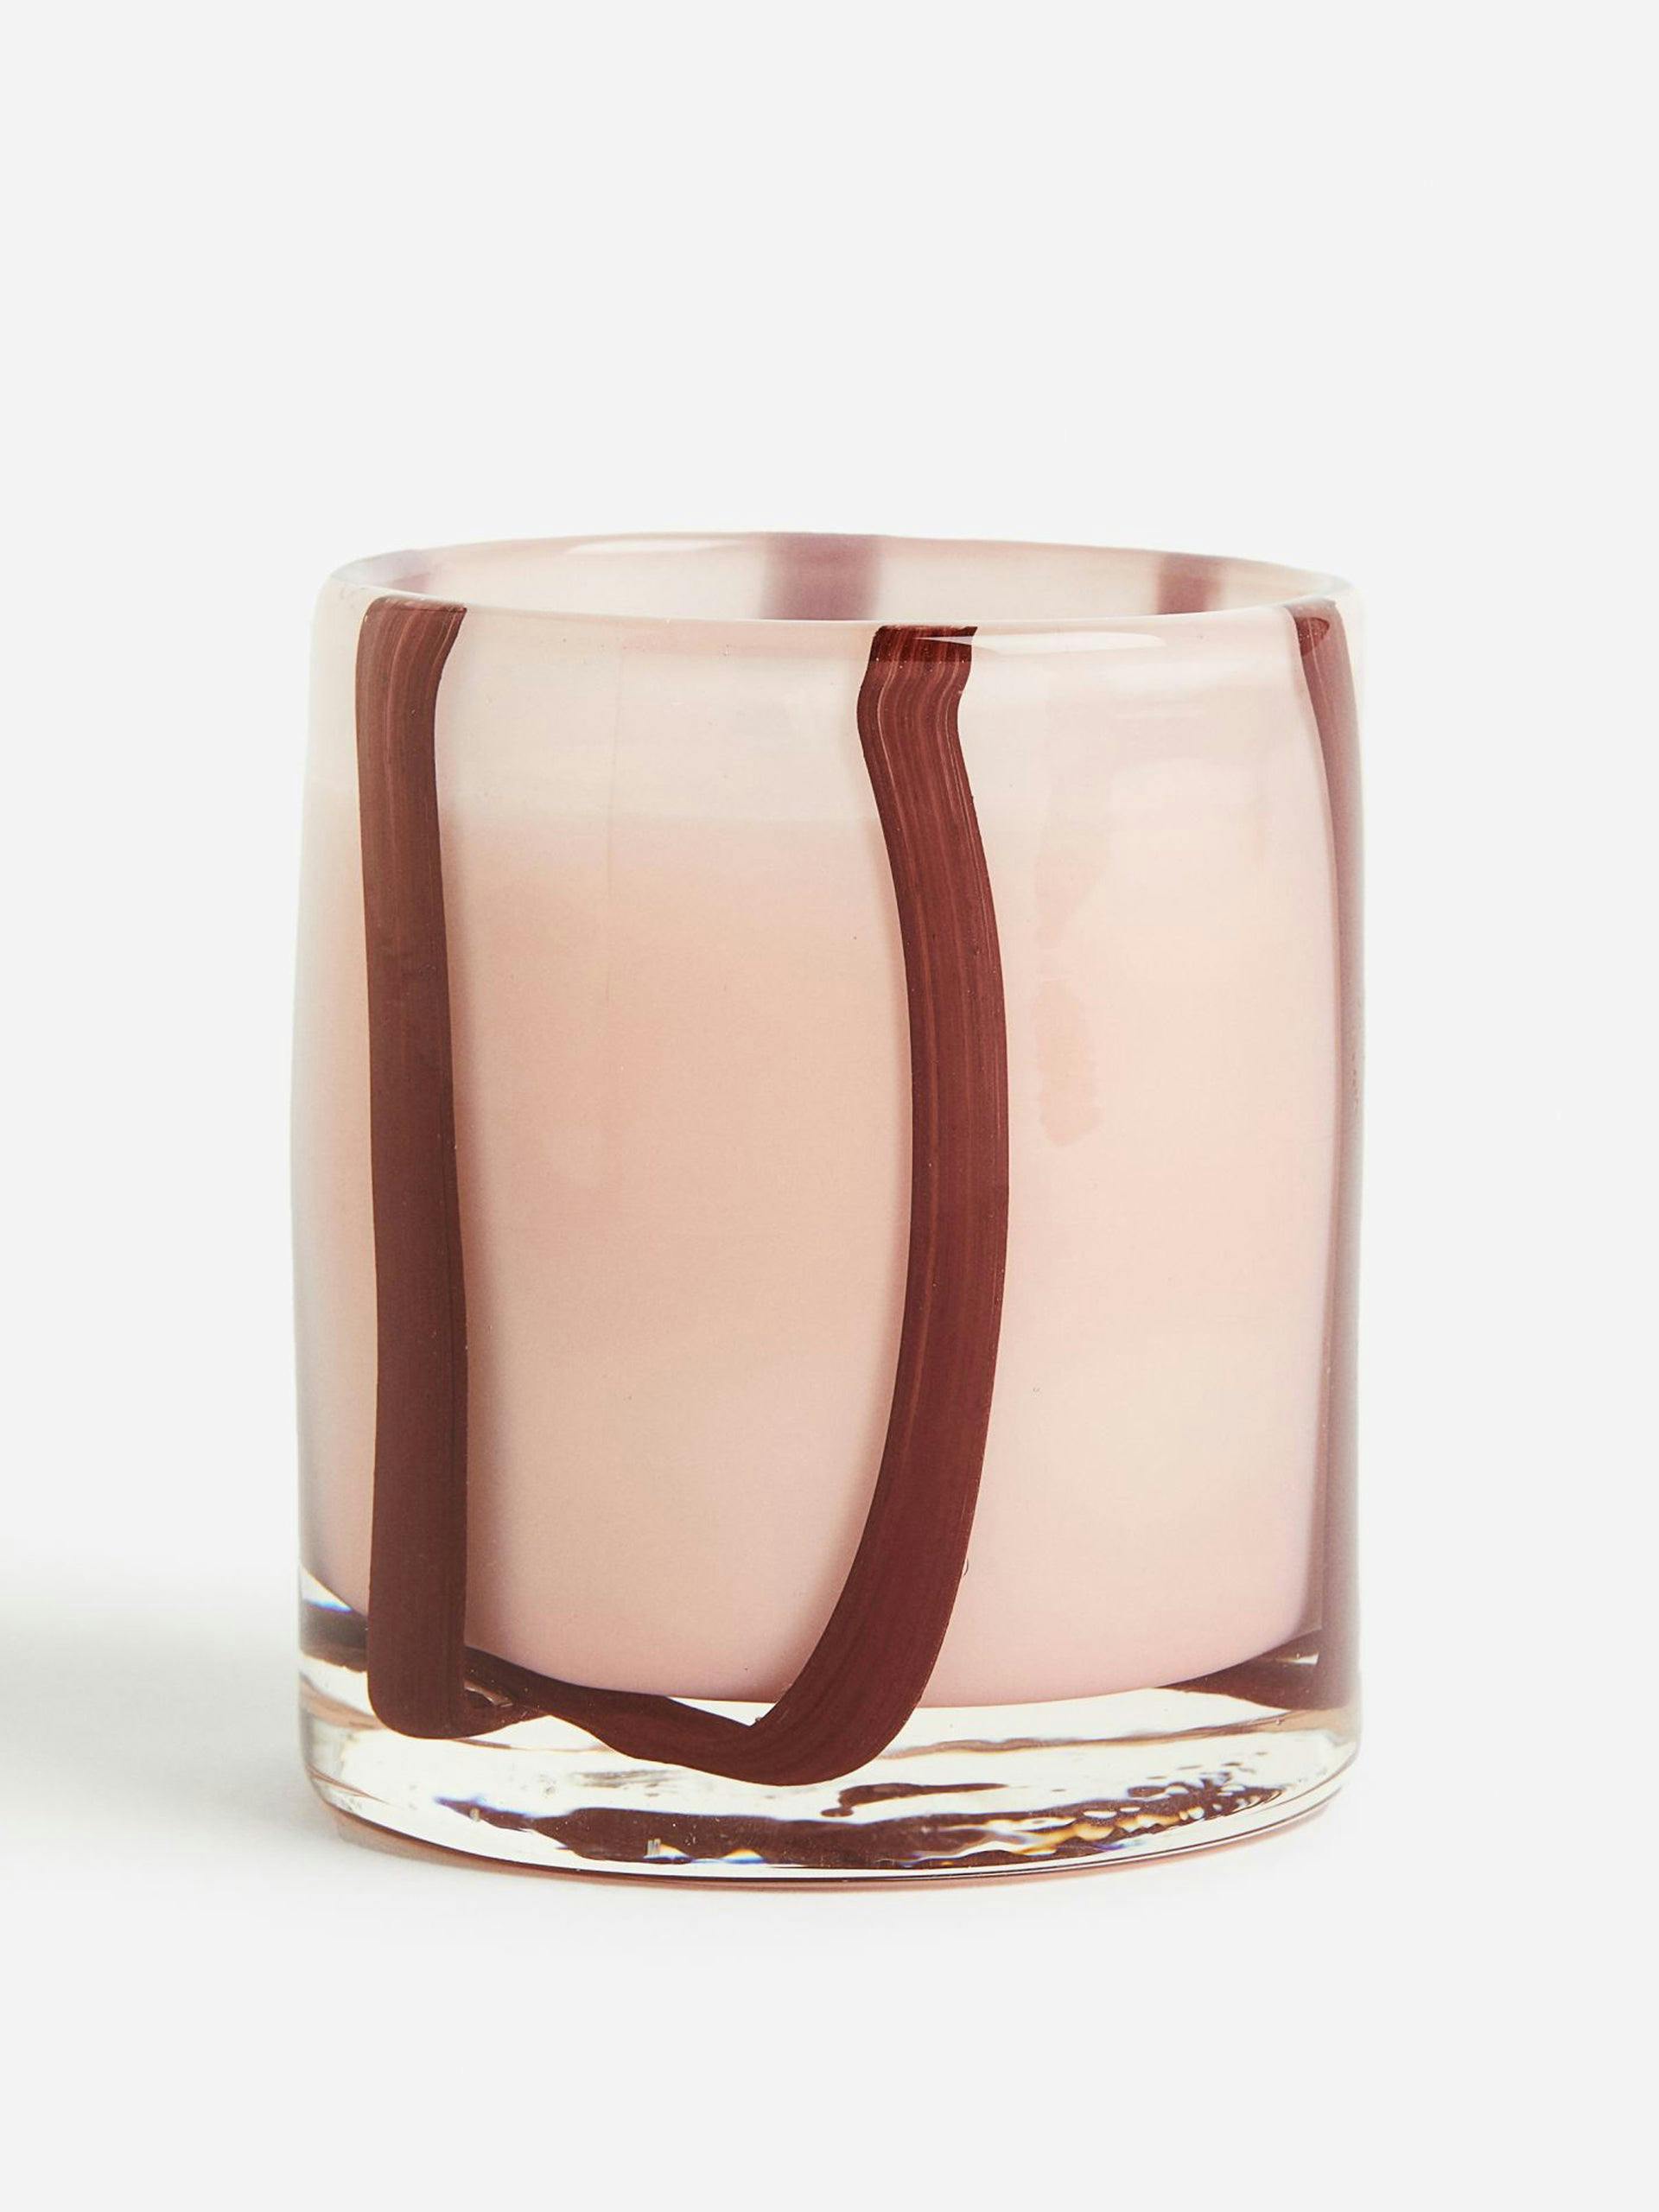 Plum Noir scented candle in striped glass holder